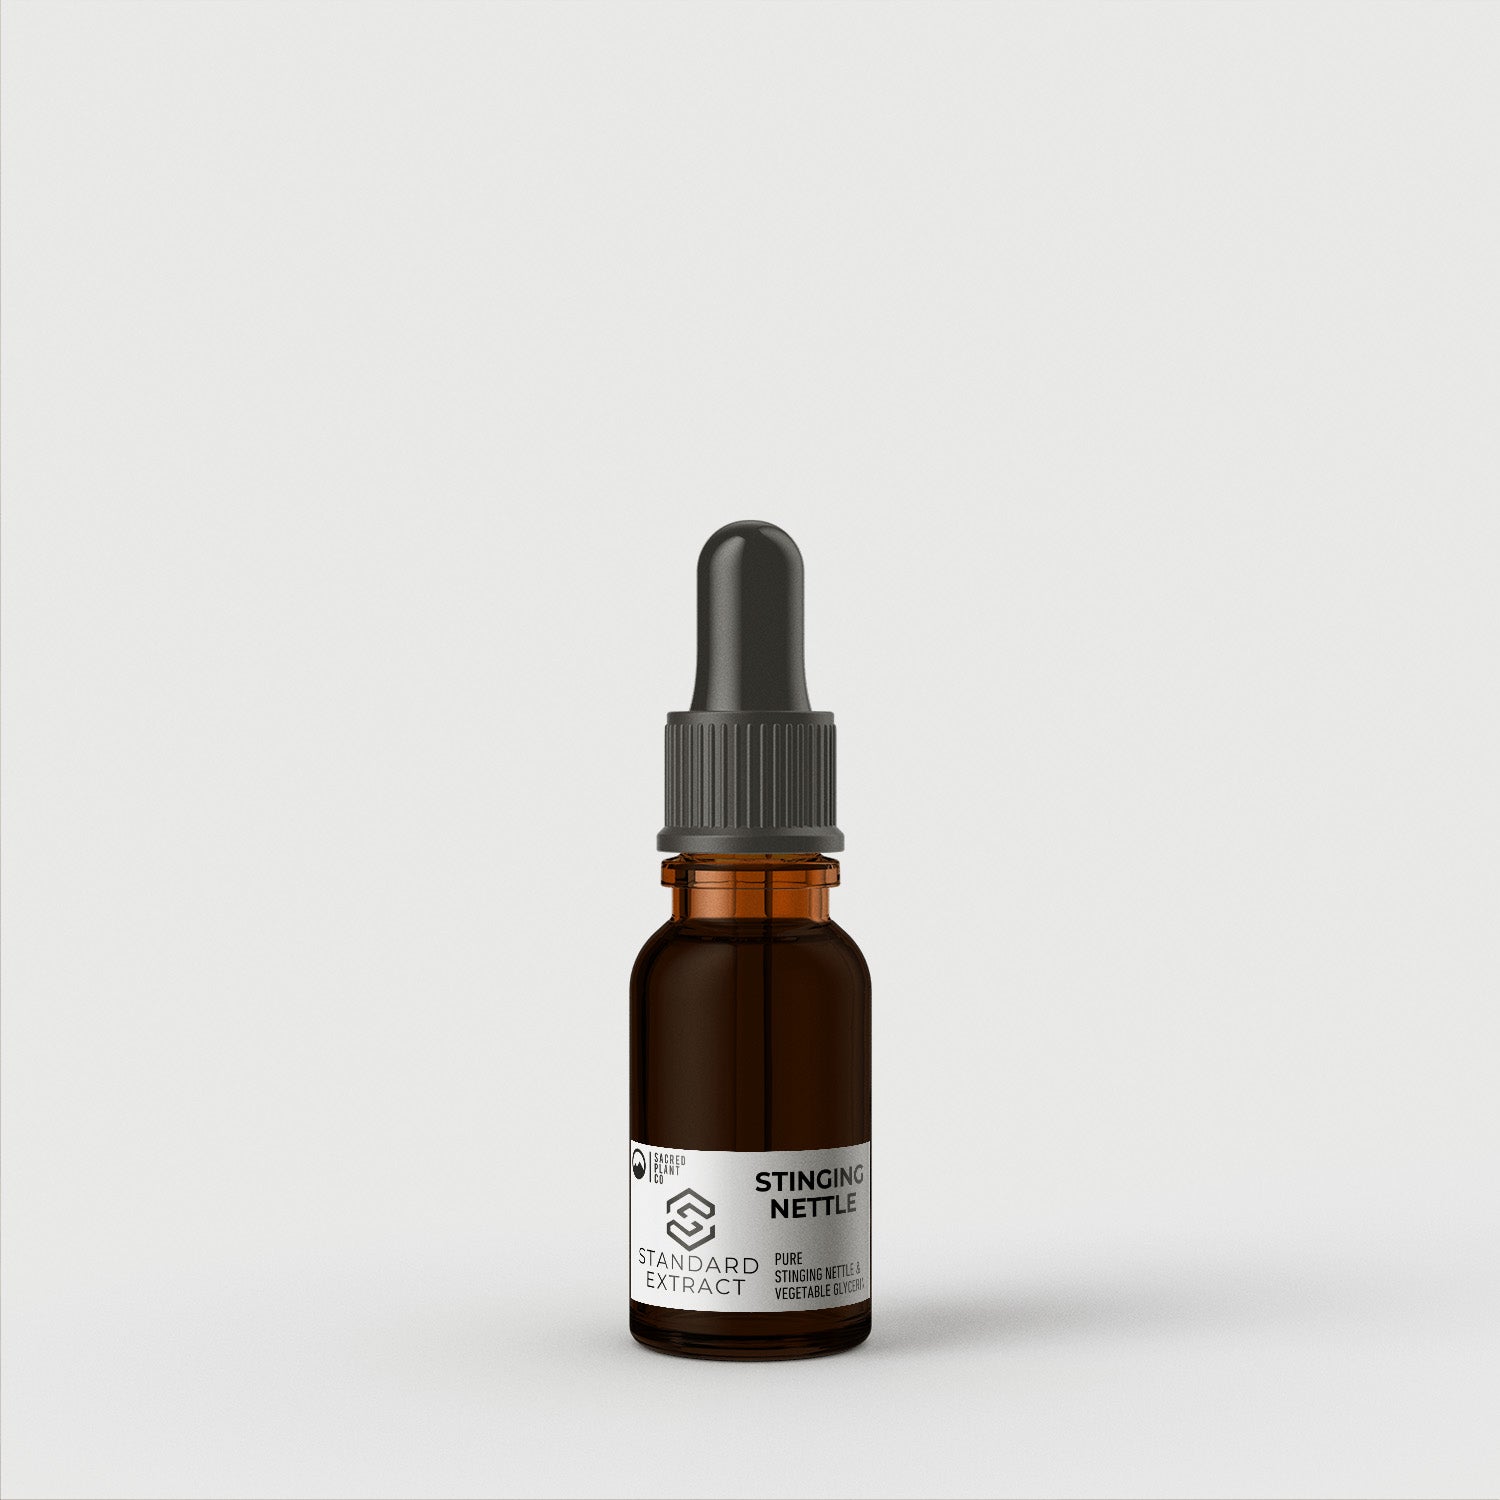 A 15ml bottle of Sacred Plant Co Standard Stinging Nettle Extract Tincture with a black dropper cap on a plain background.